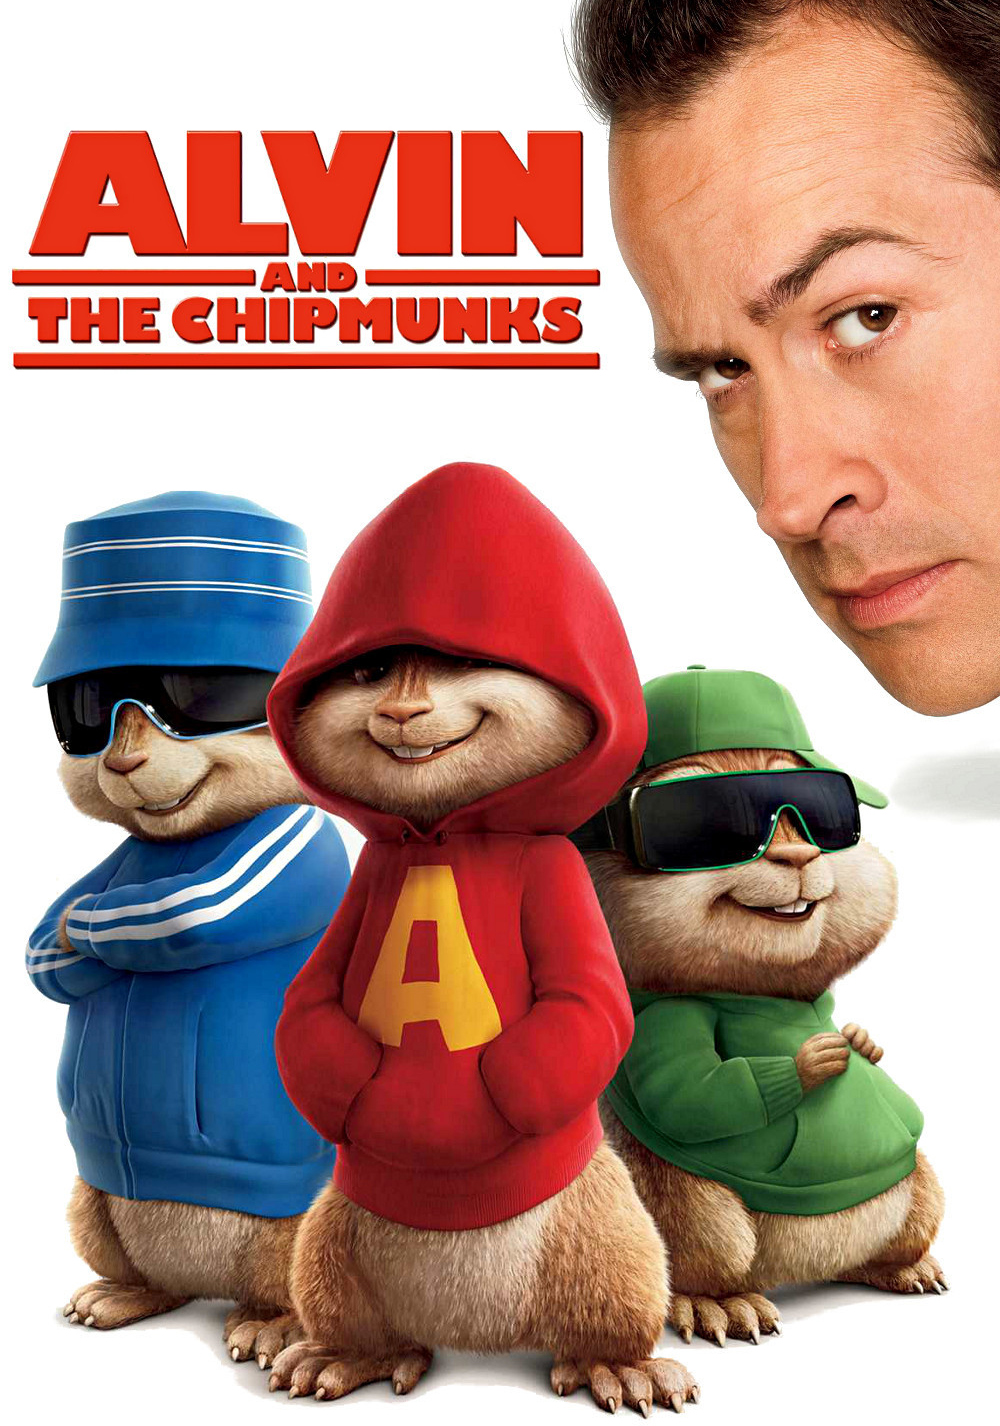 Alvin and the Chipmunks Movie Poster - ID: 71634 - Image Abyss.